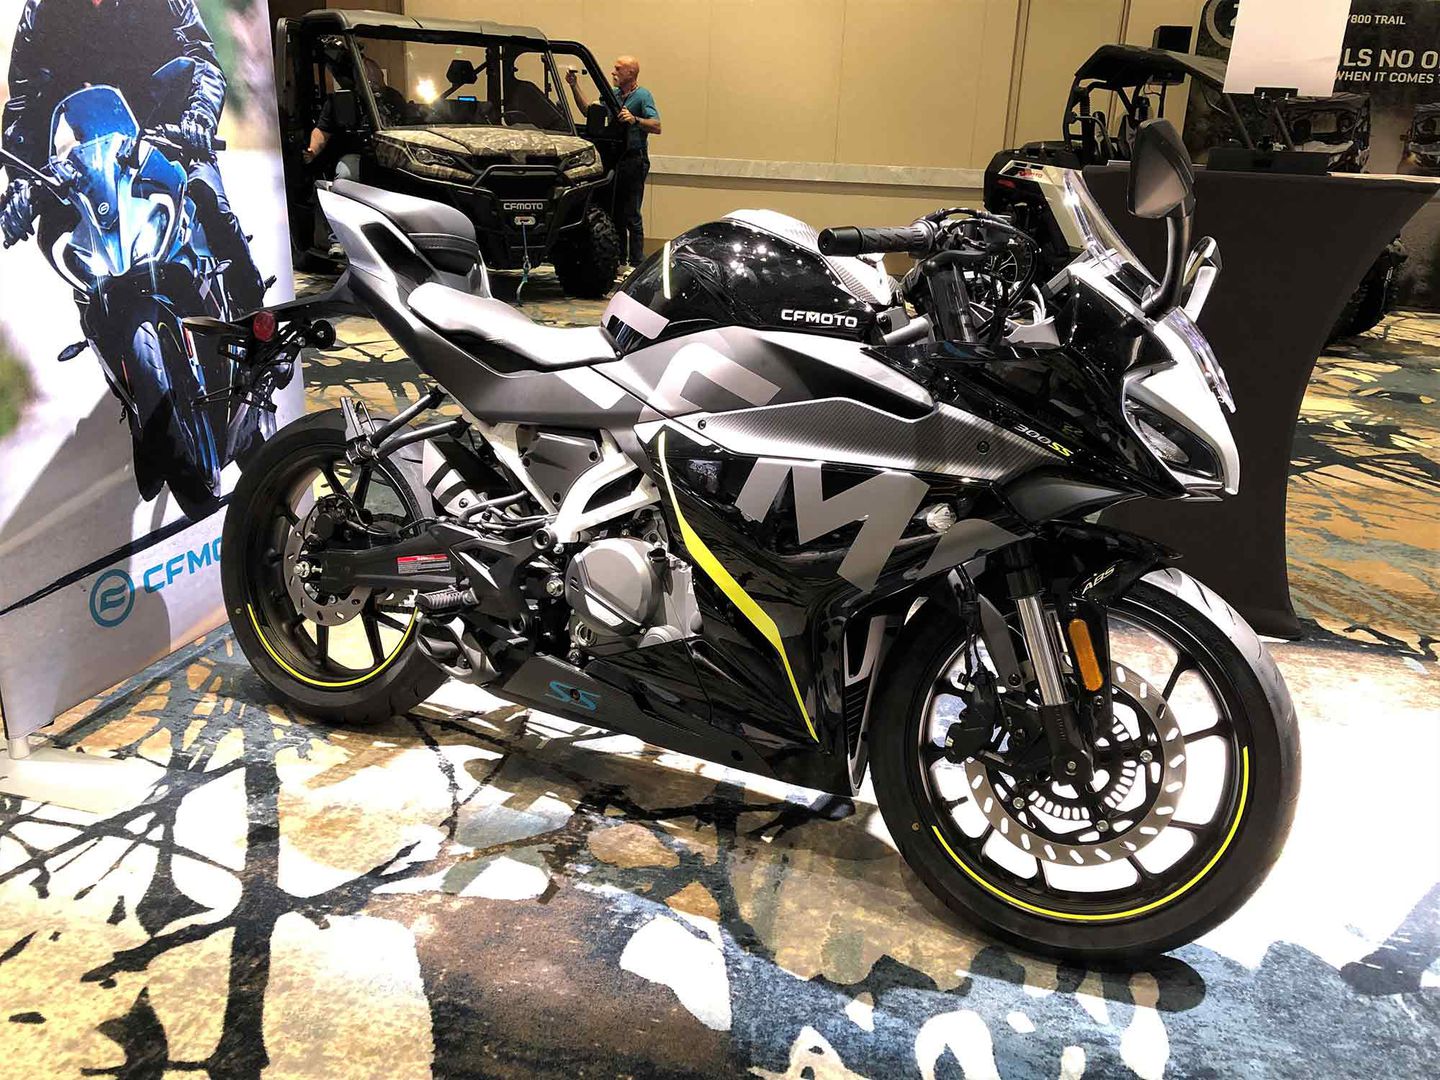 The 300cc of unashamedly sporty attitude is what the 300SS sport brings to the table, along with a splash of race-inspired graphics and a $4,299 price tag.